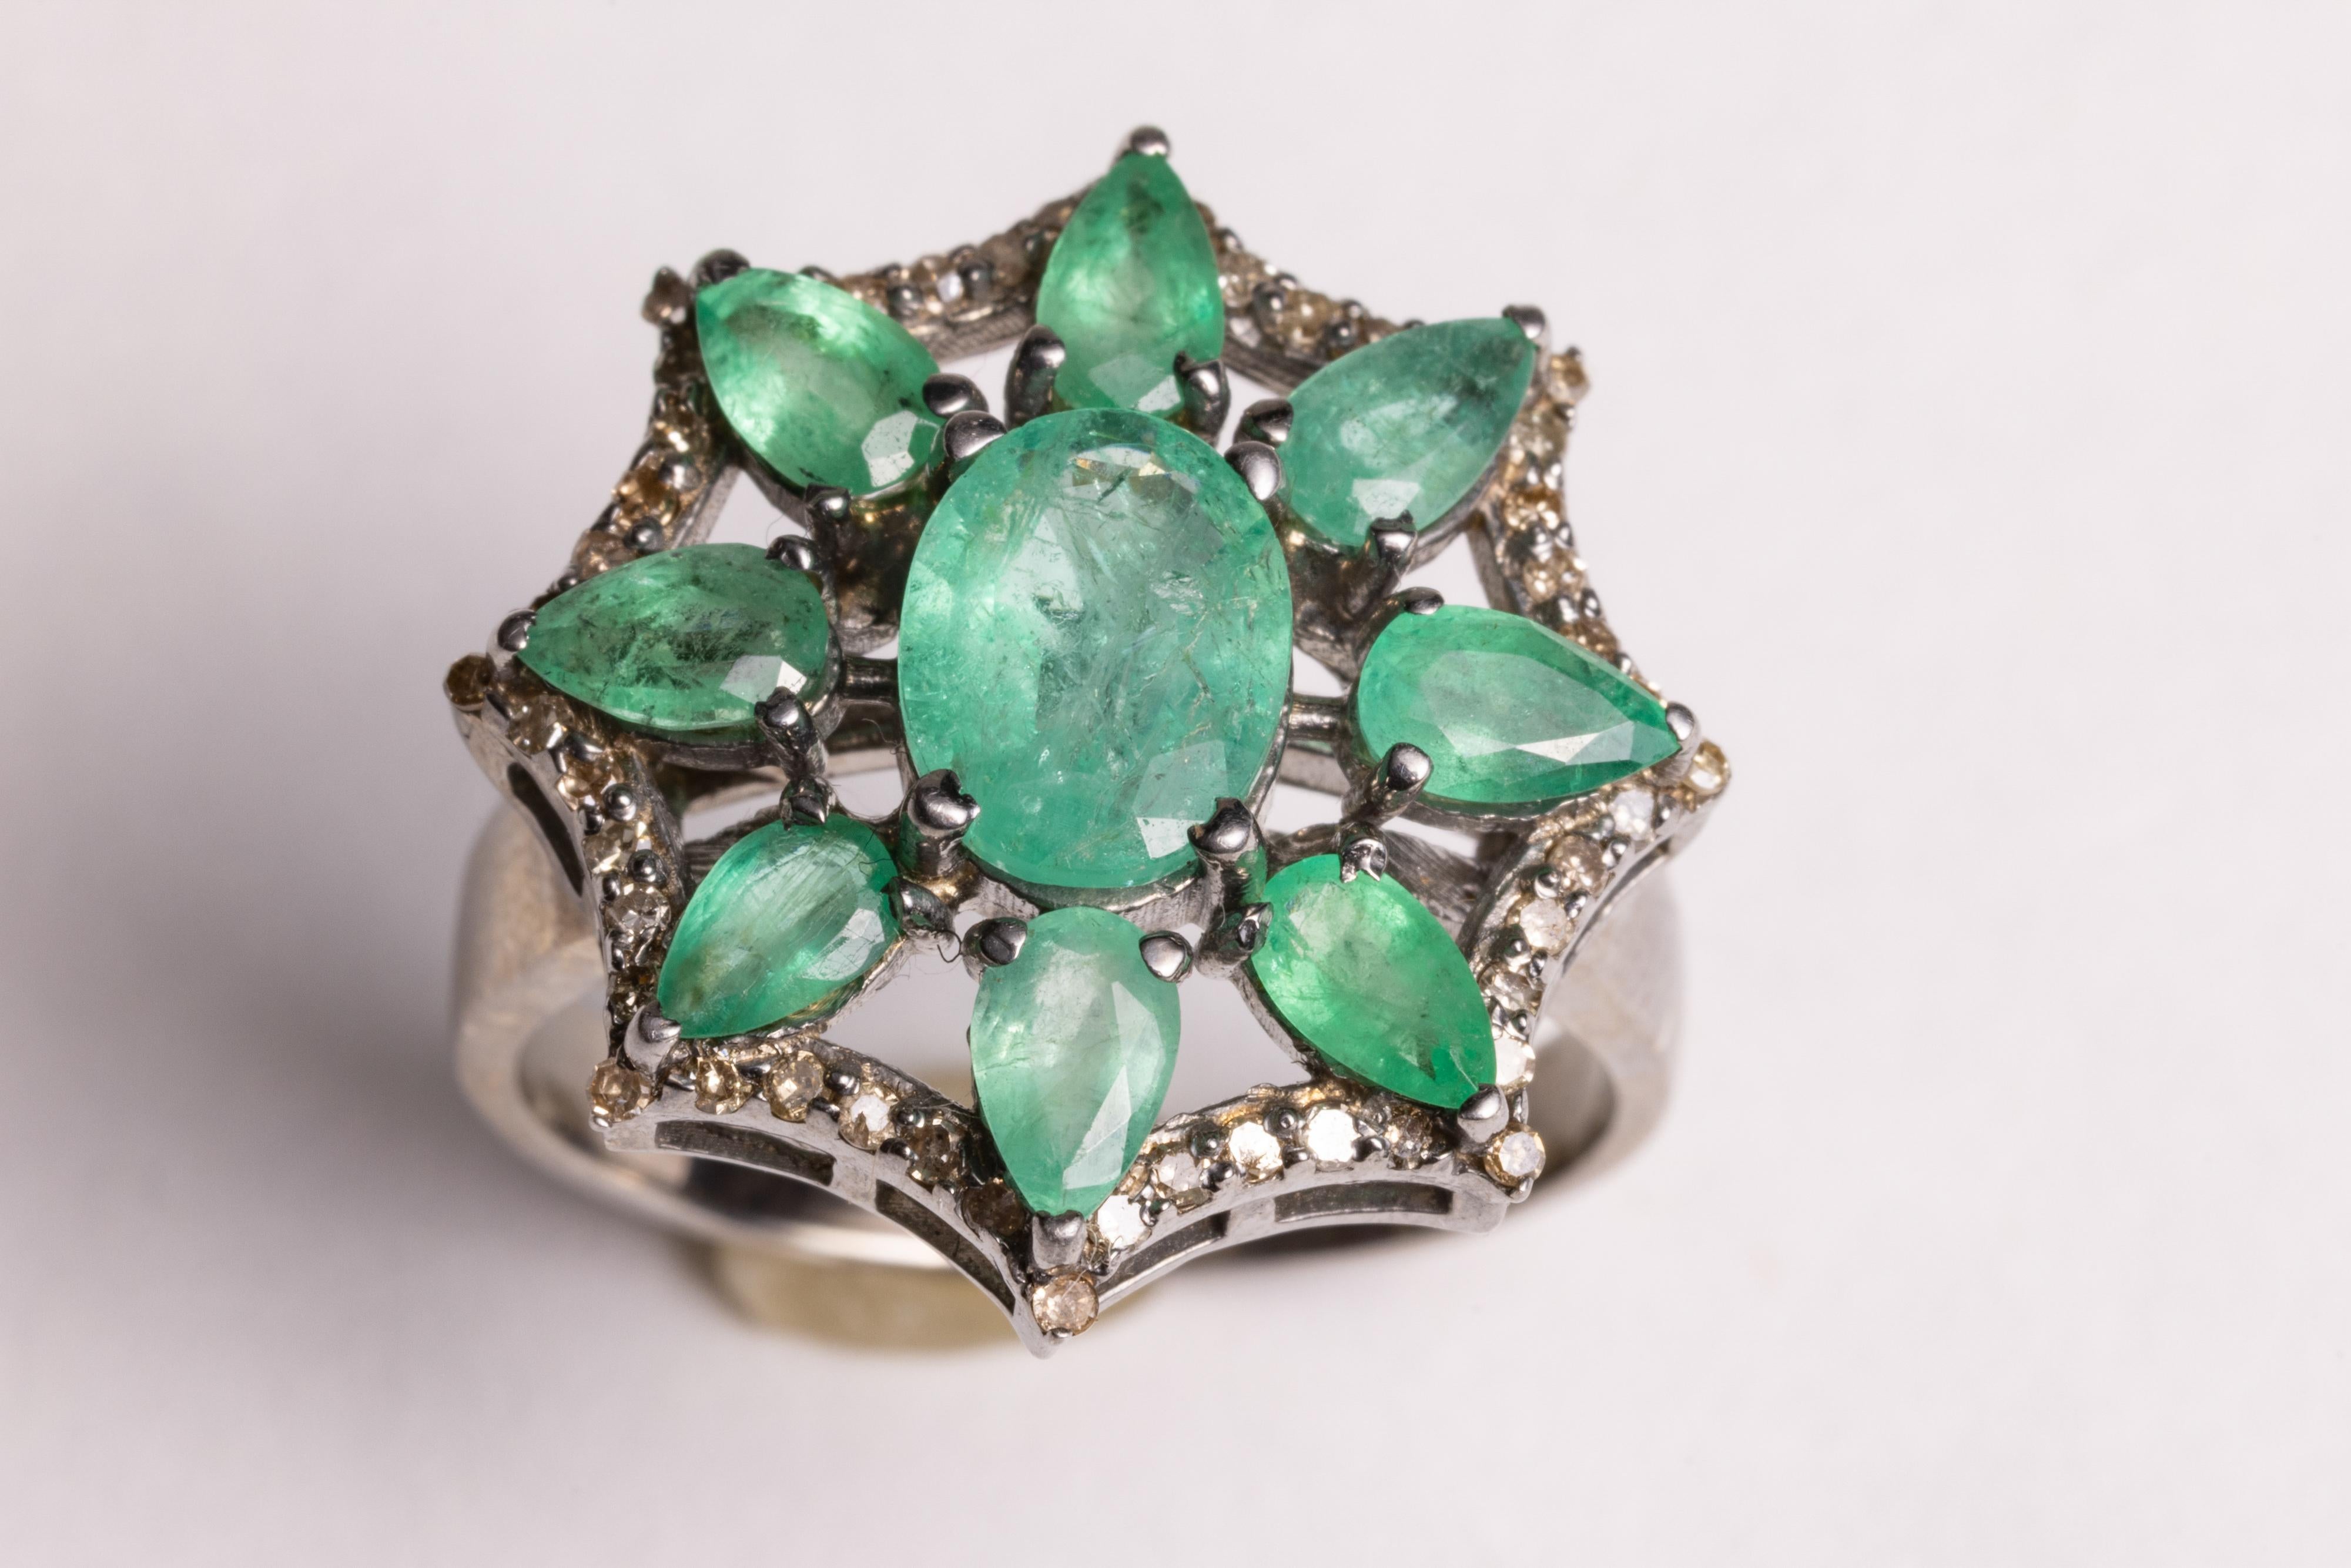 An emerald cluster cocktail ring with an oval, faceted emerald in a flower motif surrounded by 8 pear-shaped faceted emeralds and round, brilliant cut diamonds.  Set in sterling silver.  Carat weight of emerald is 2.42 carats, diamonds total .34